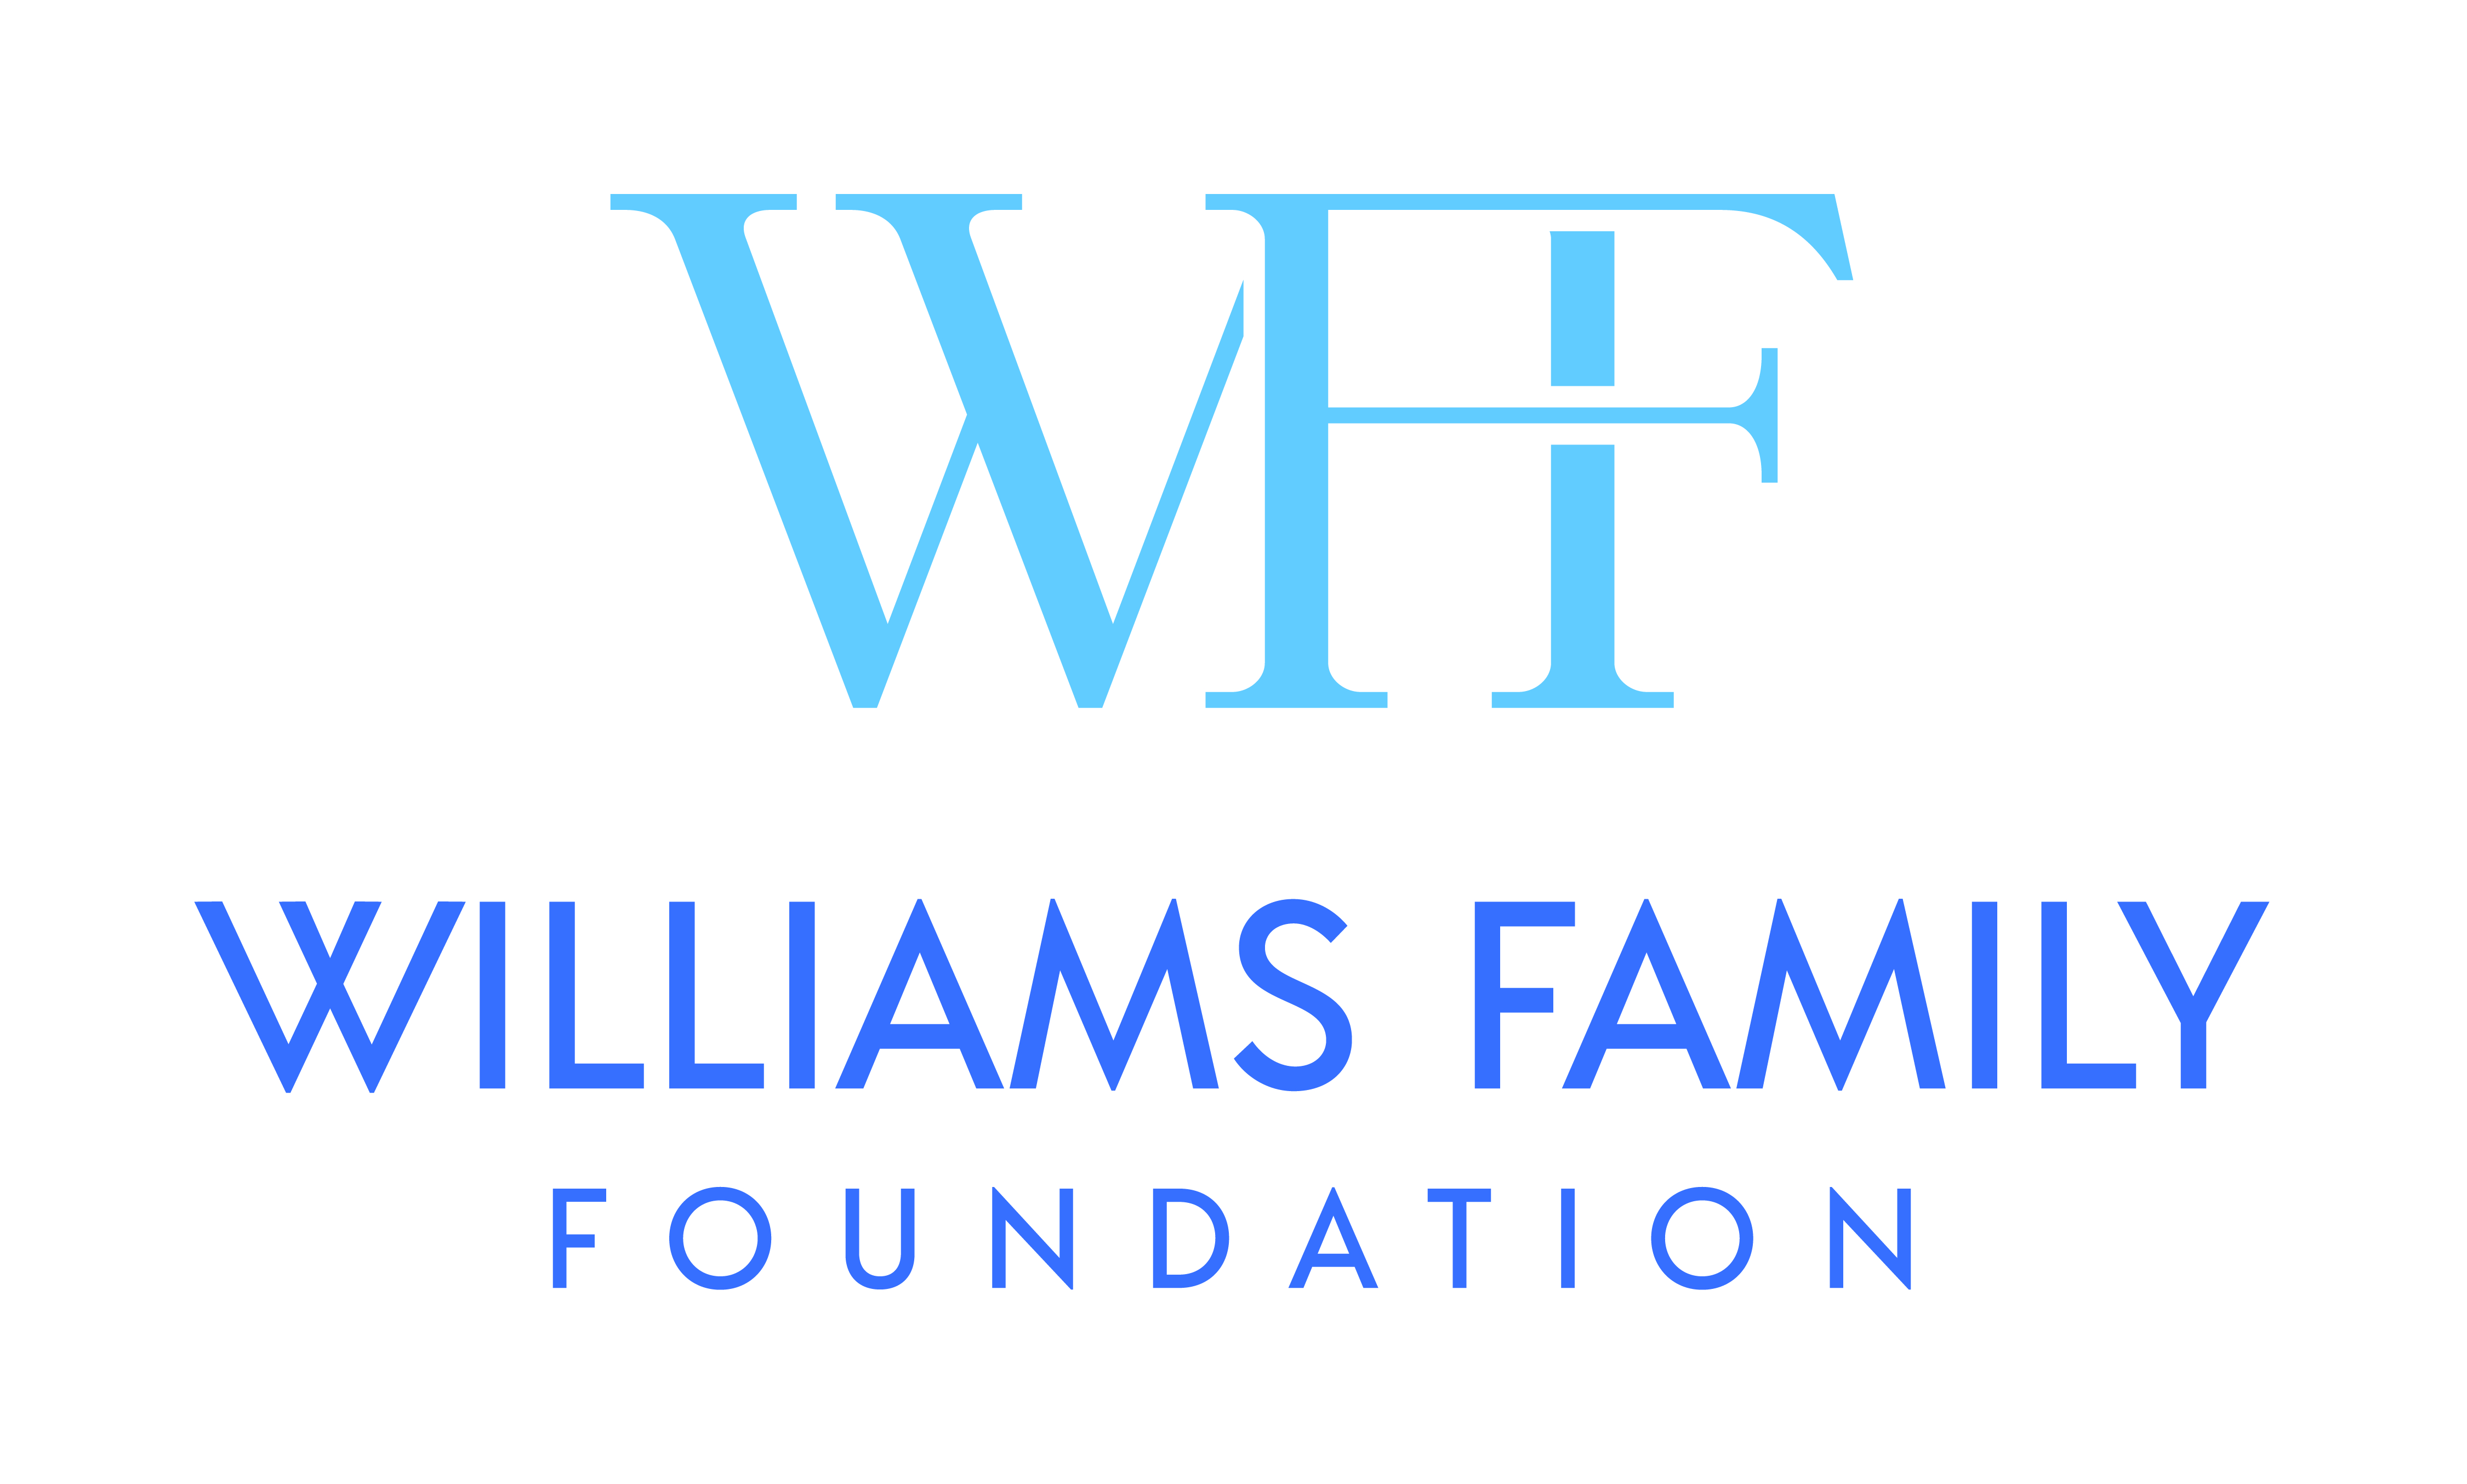 A. Williams Family Foundation (Title)